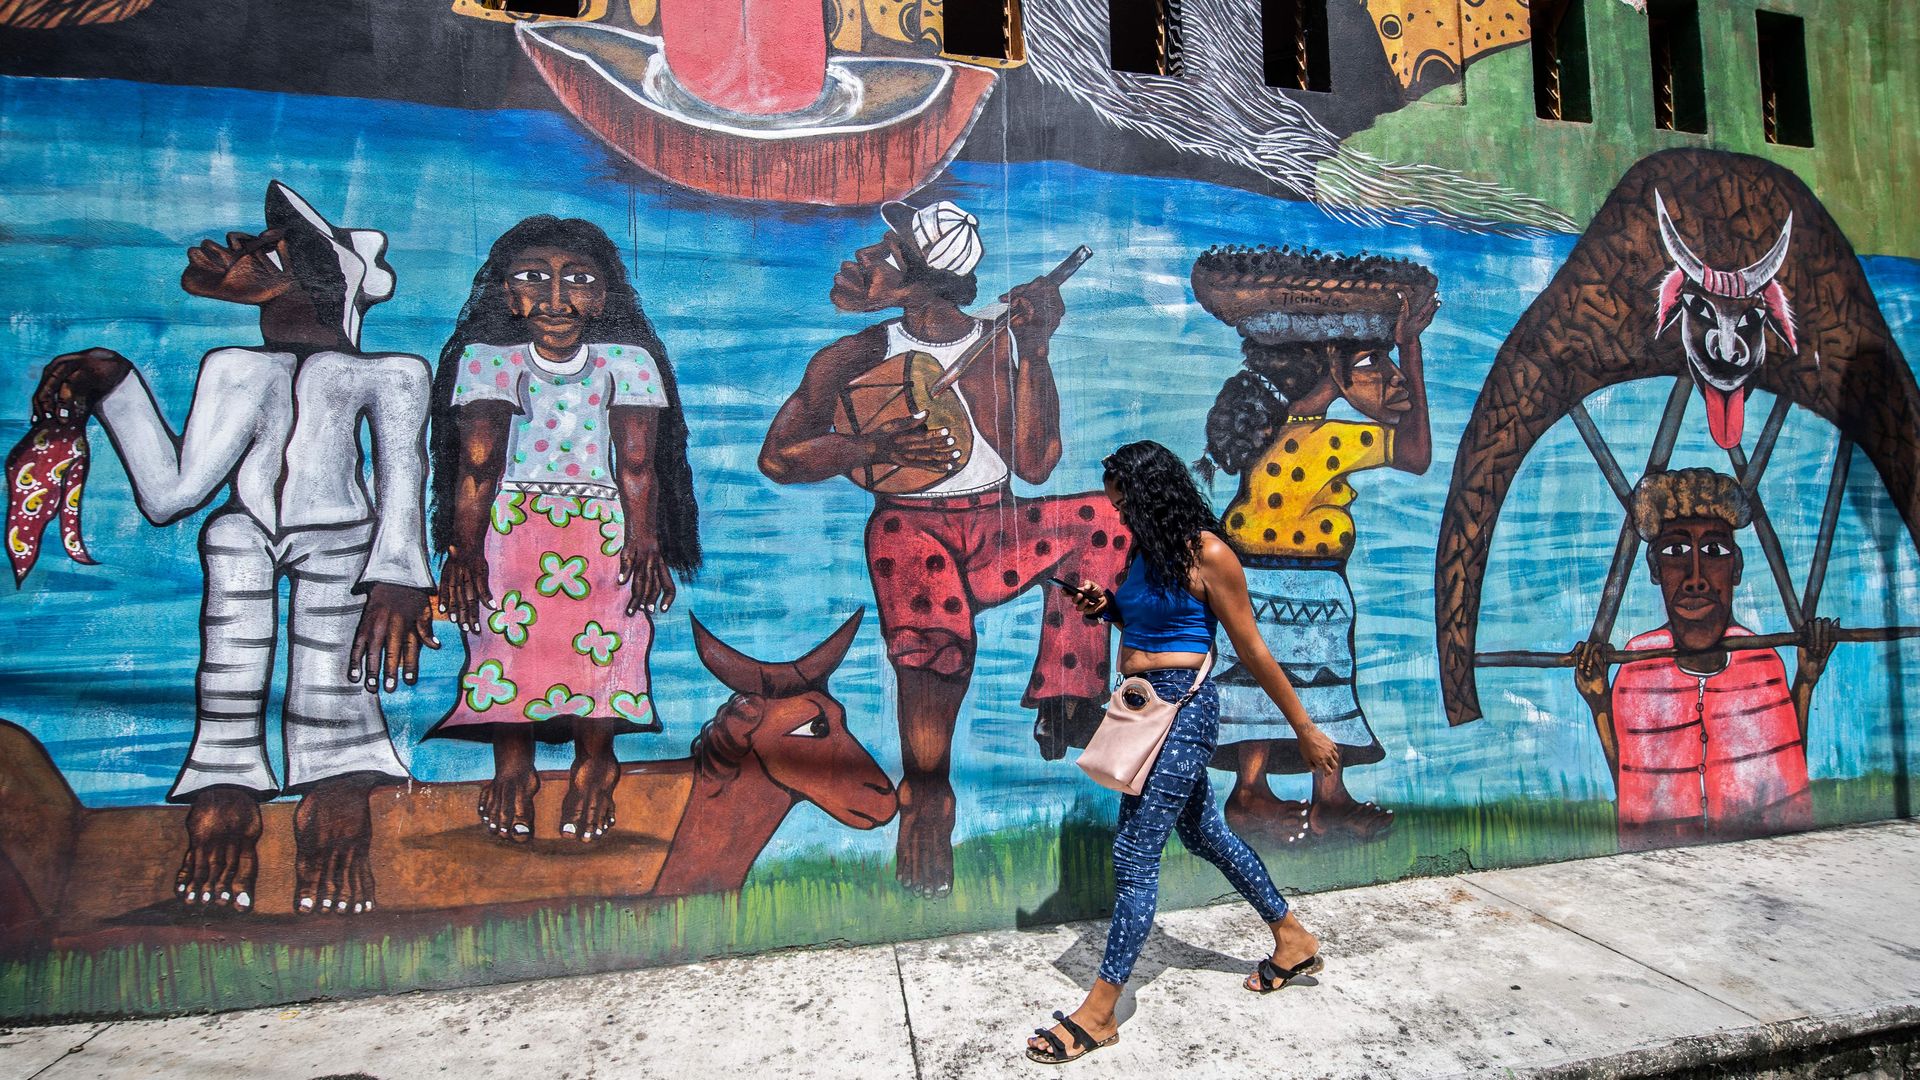 A woman, member of the Afro-Mexican community, walks past the Afro-Mexican musseum, in Cuajinicuilapa, Guerrero state, Mexico, on September 10, 2020.